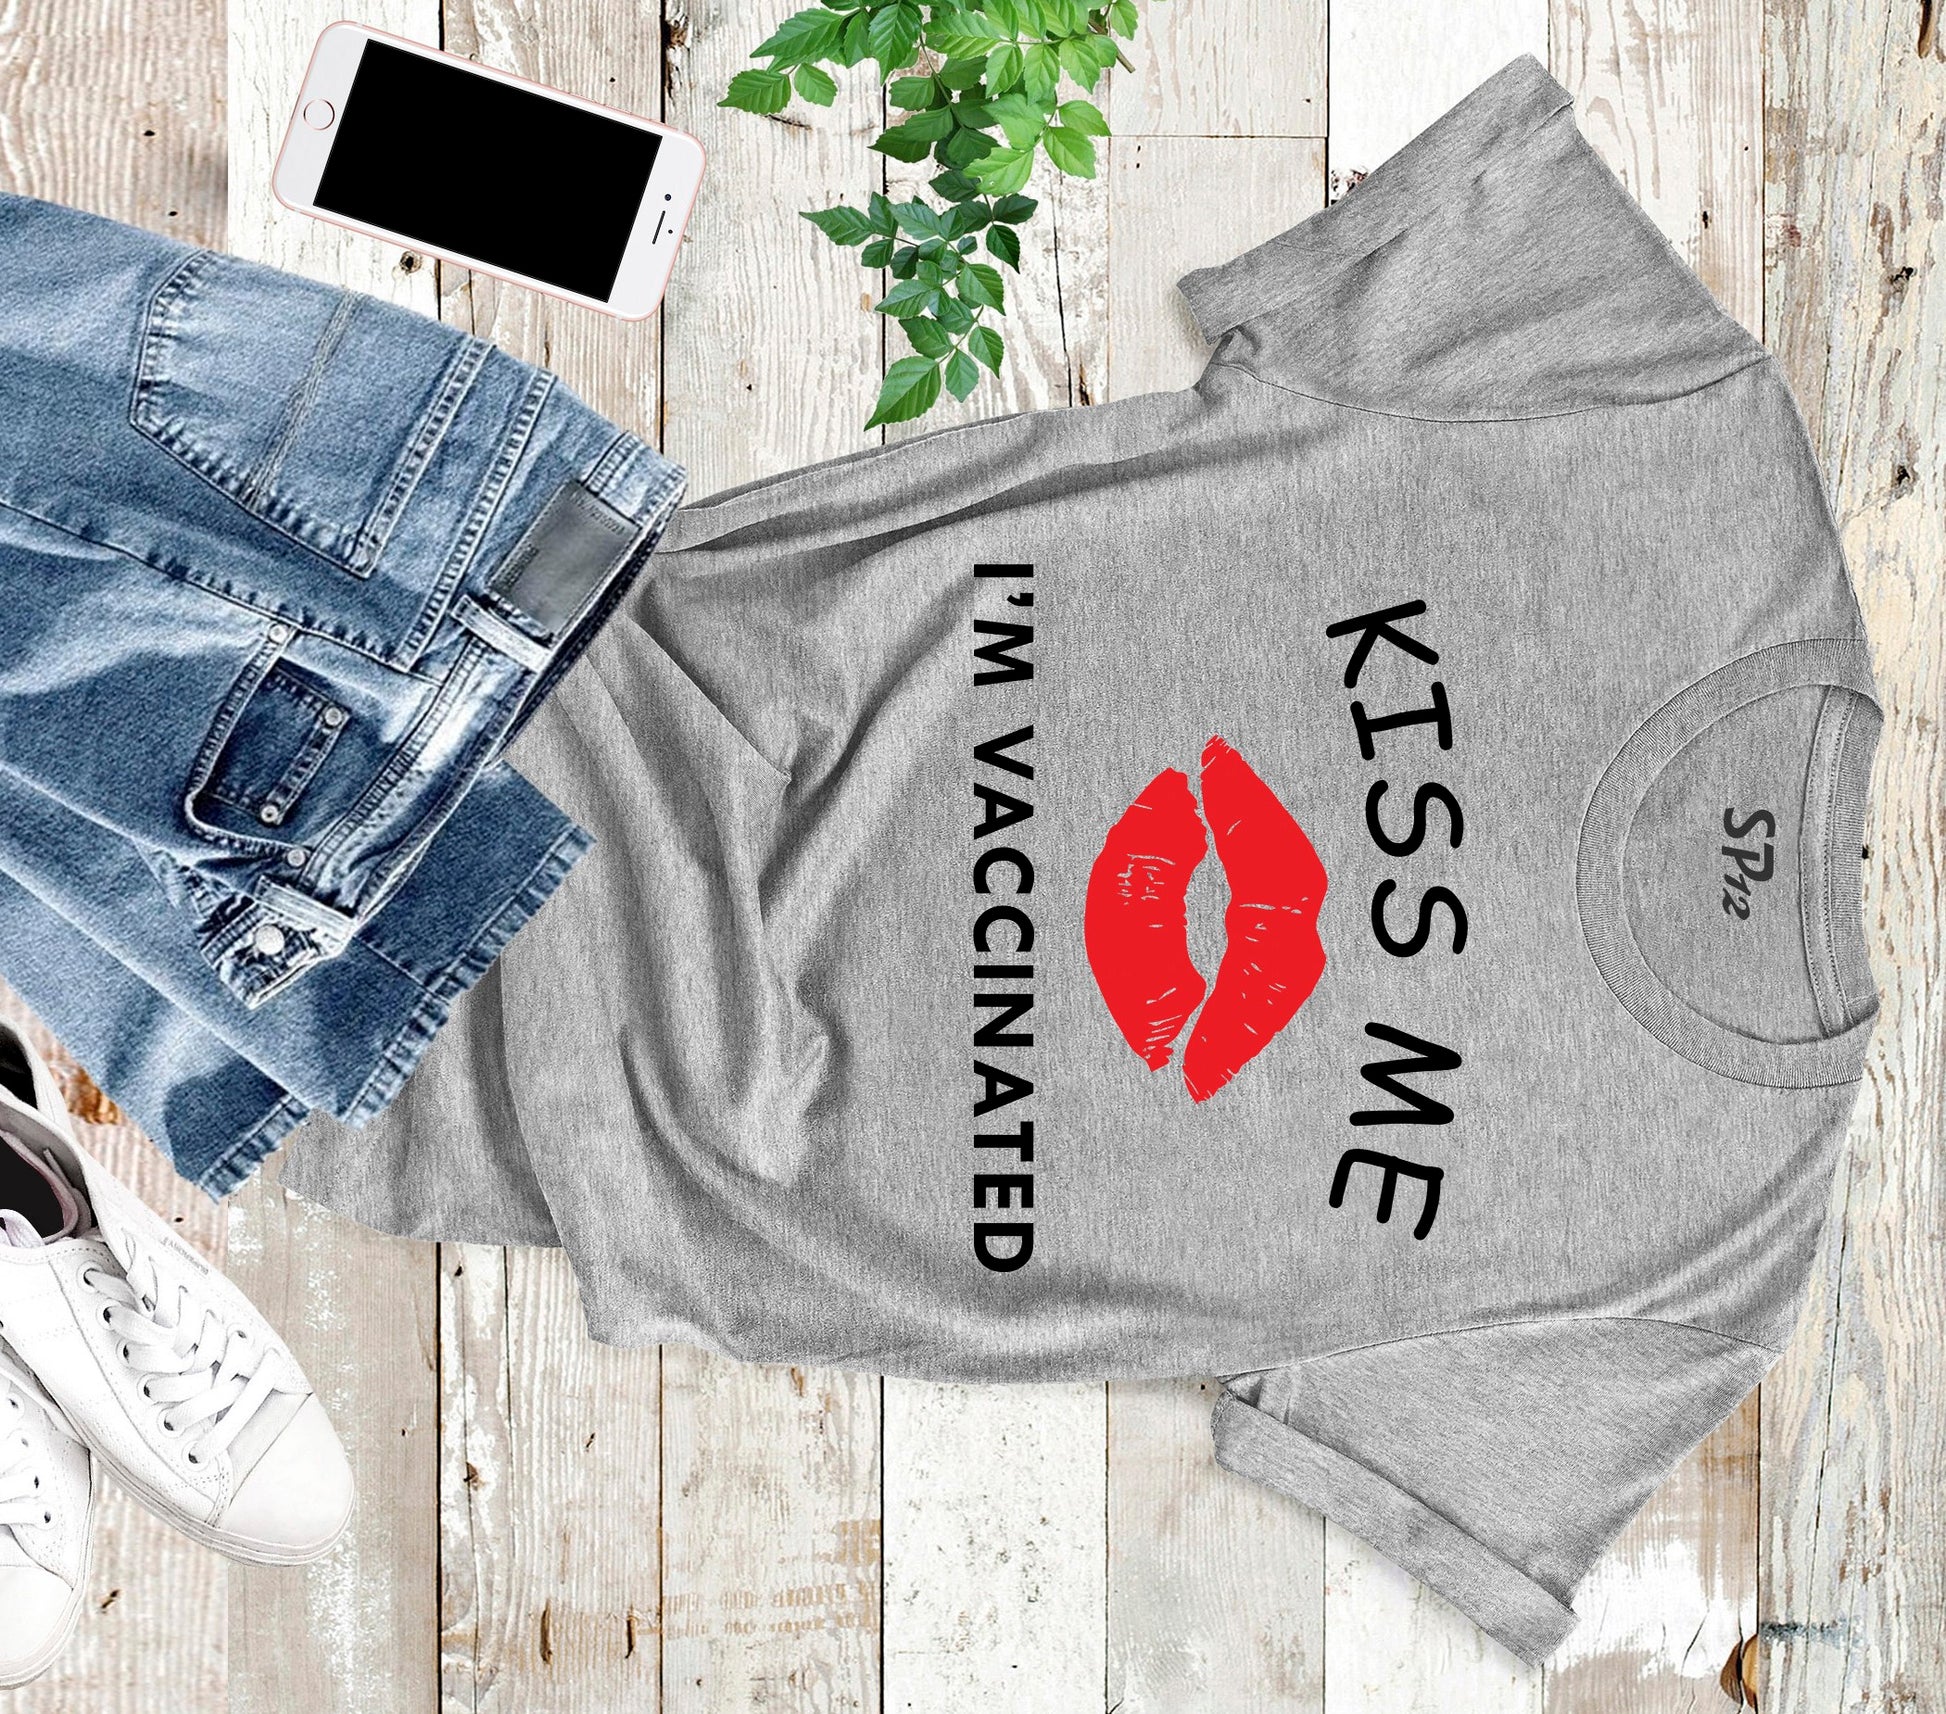 Kiss Me I Am Vaccinated T Shirt